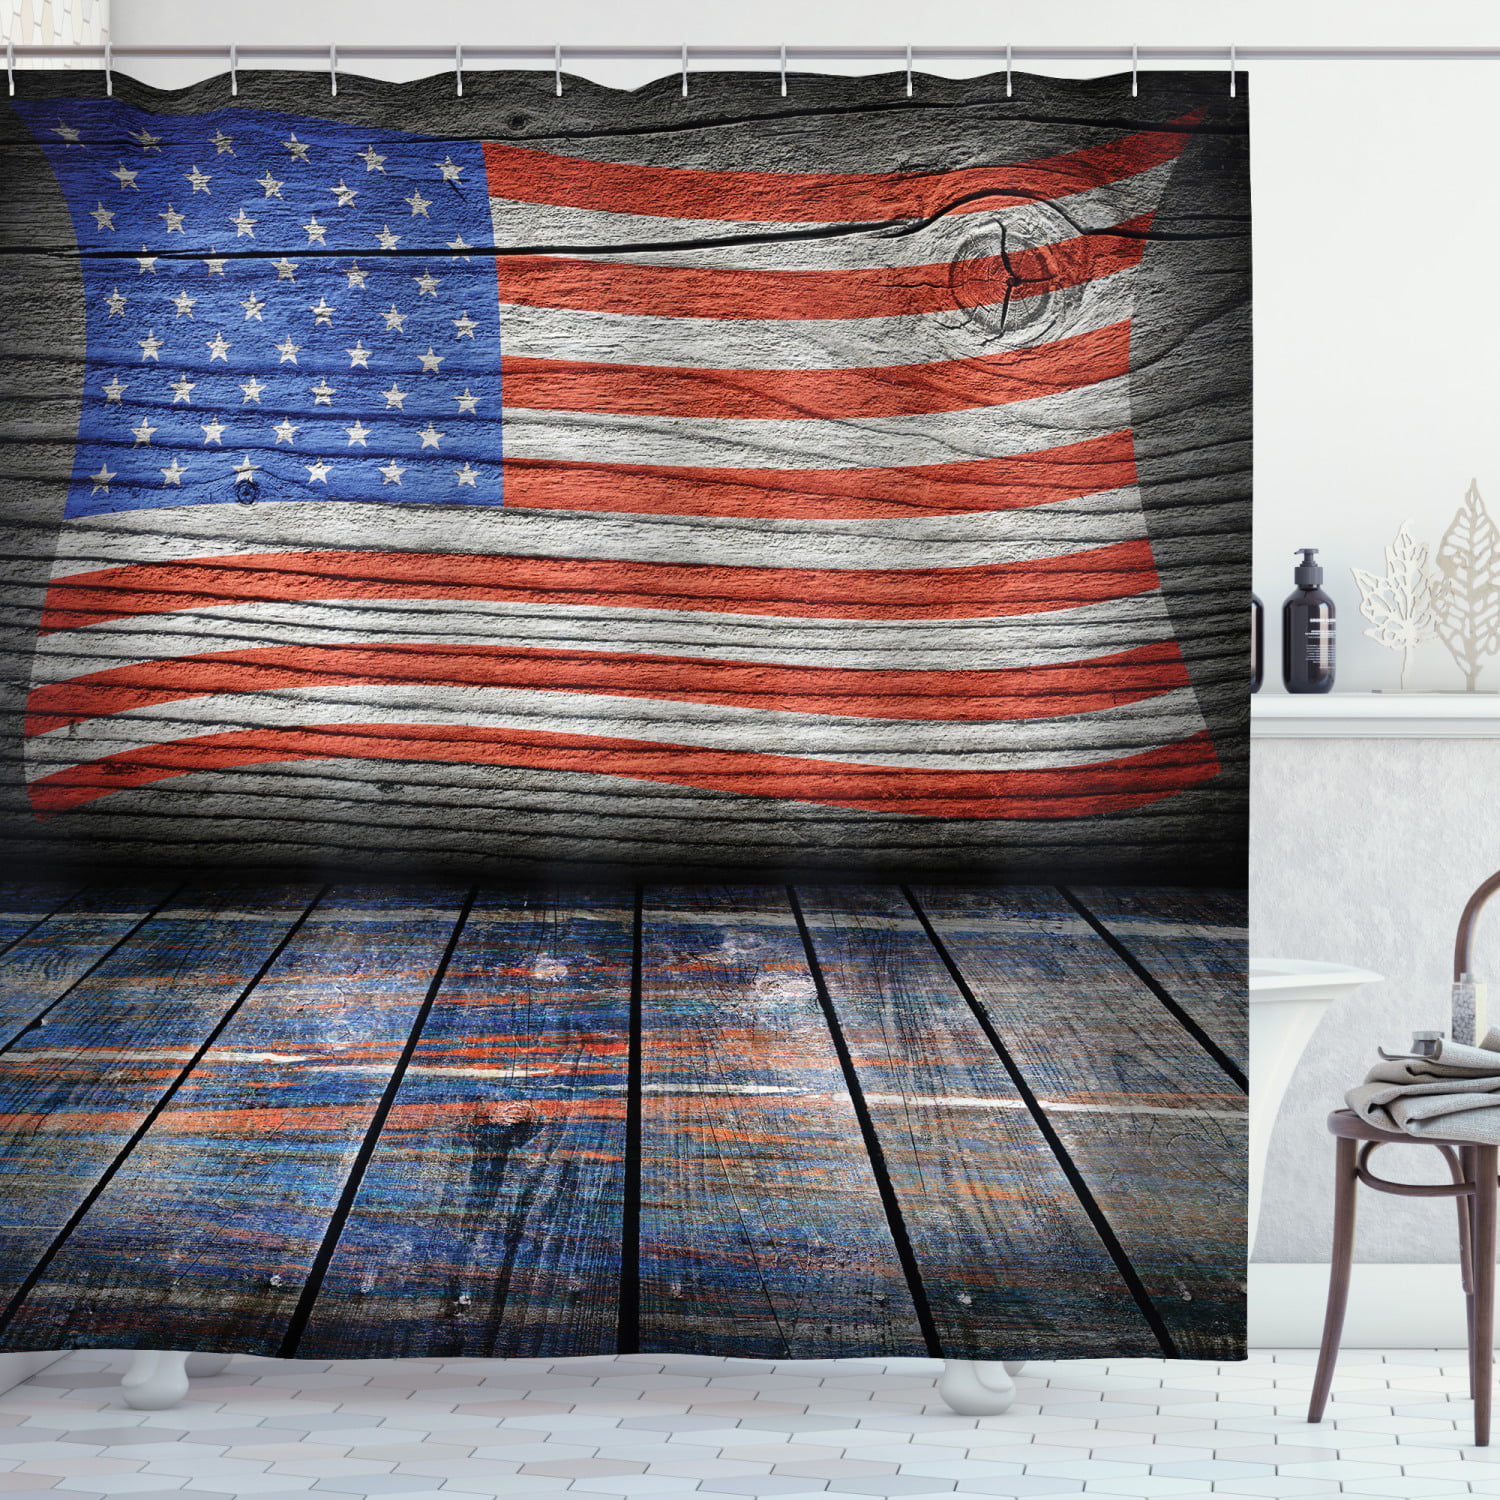 Wknoon 72 x 72 Inch Shower Curtain Set Abstract Vintage Patriotic Deer Old Forest Retro American Flag Design Art